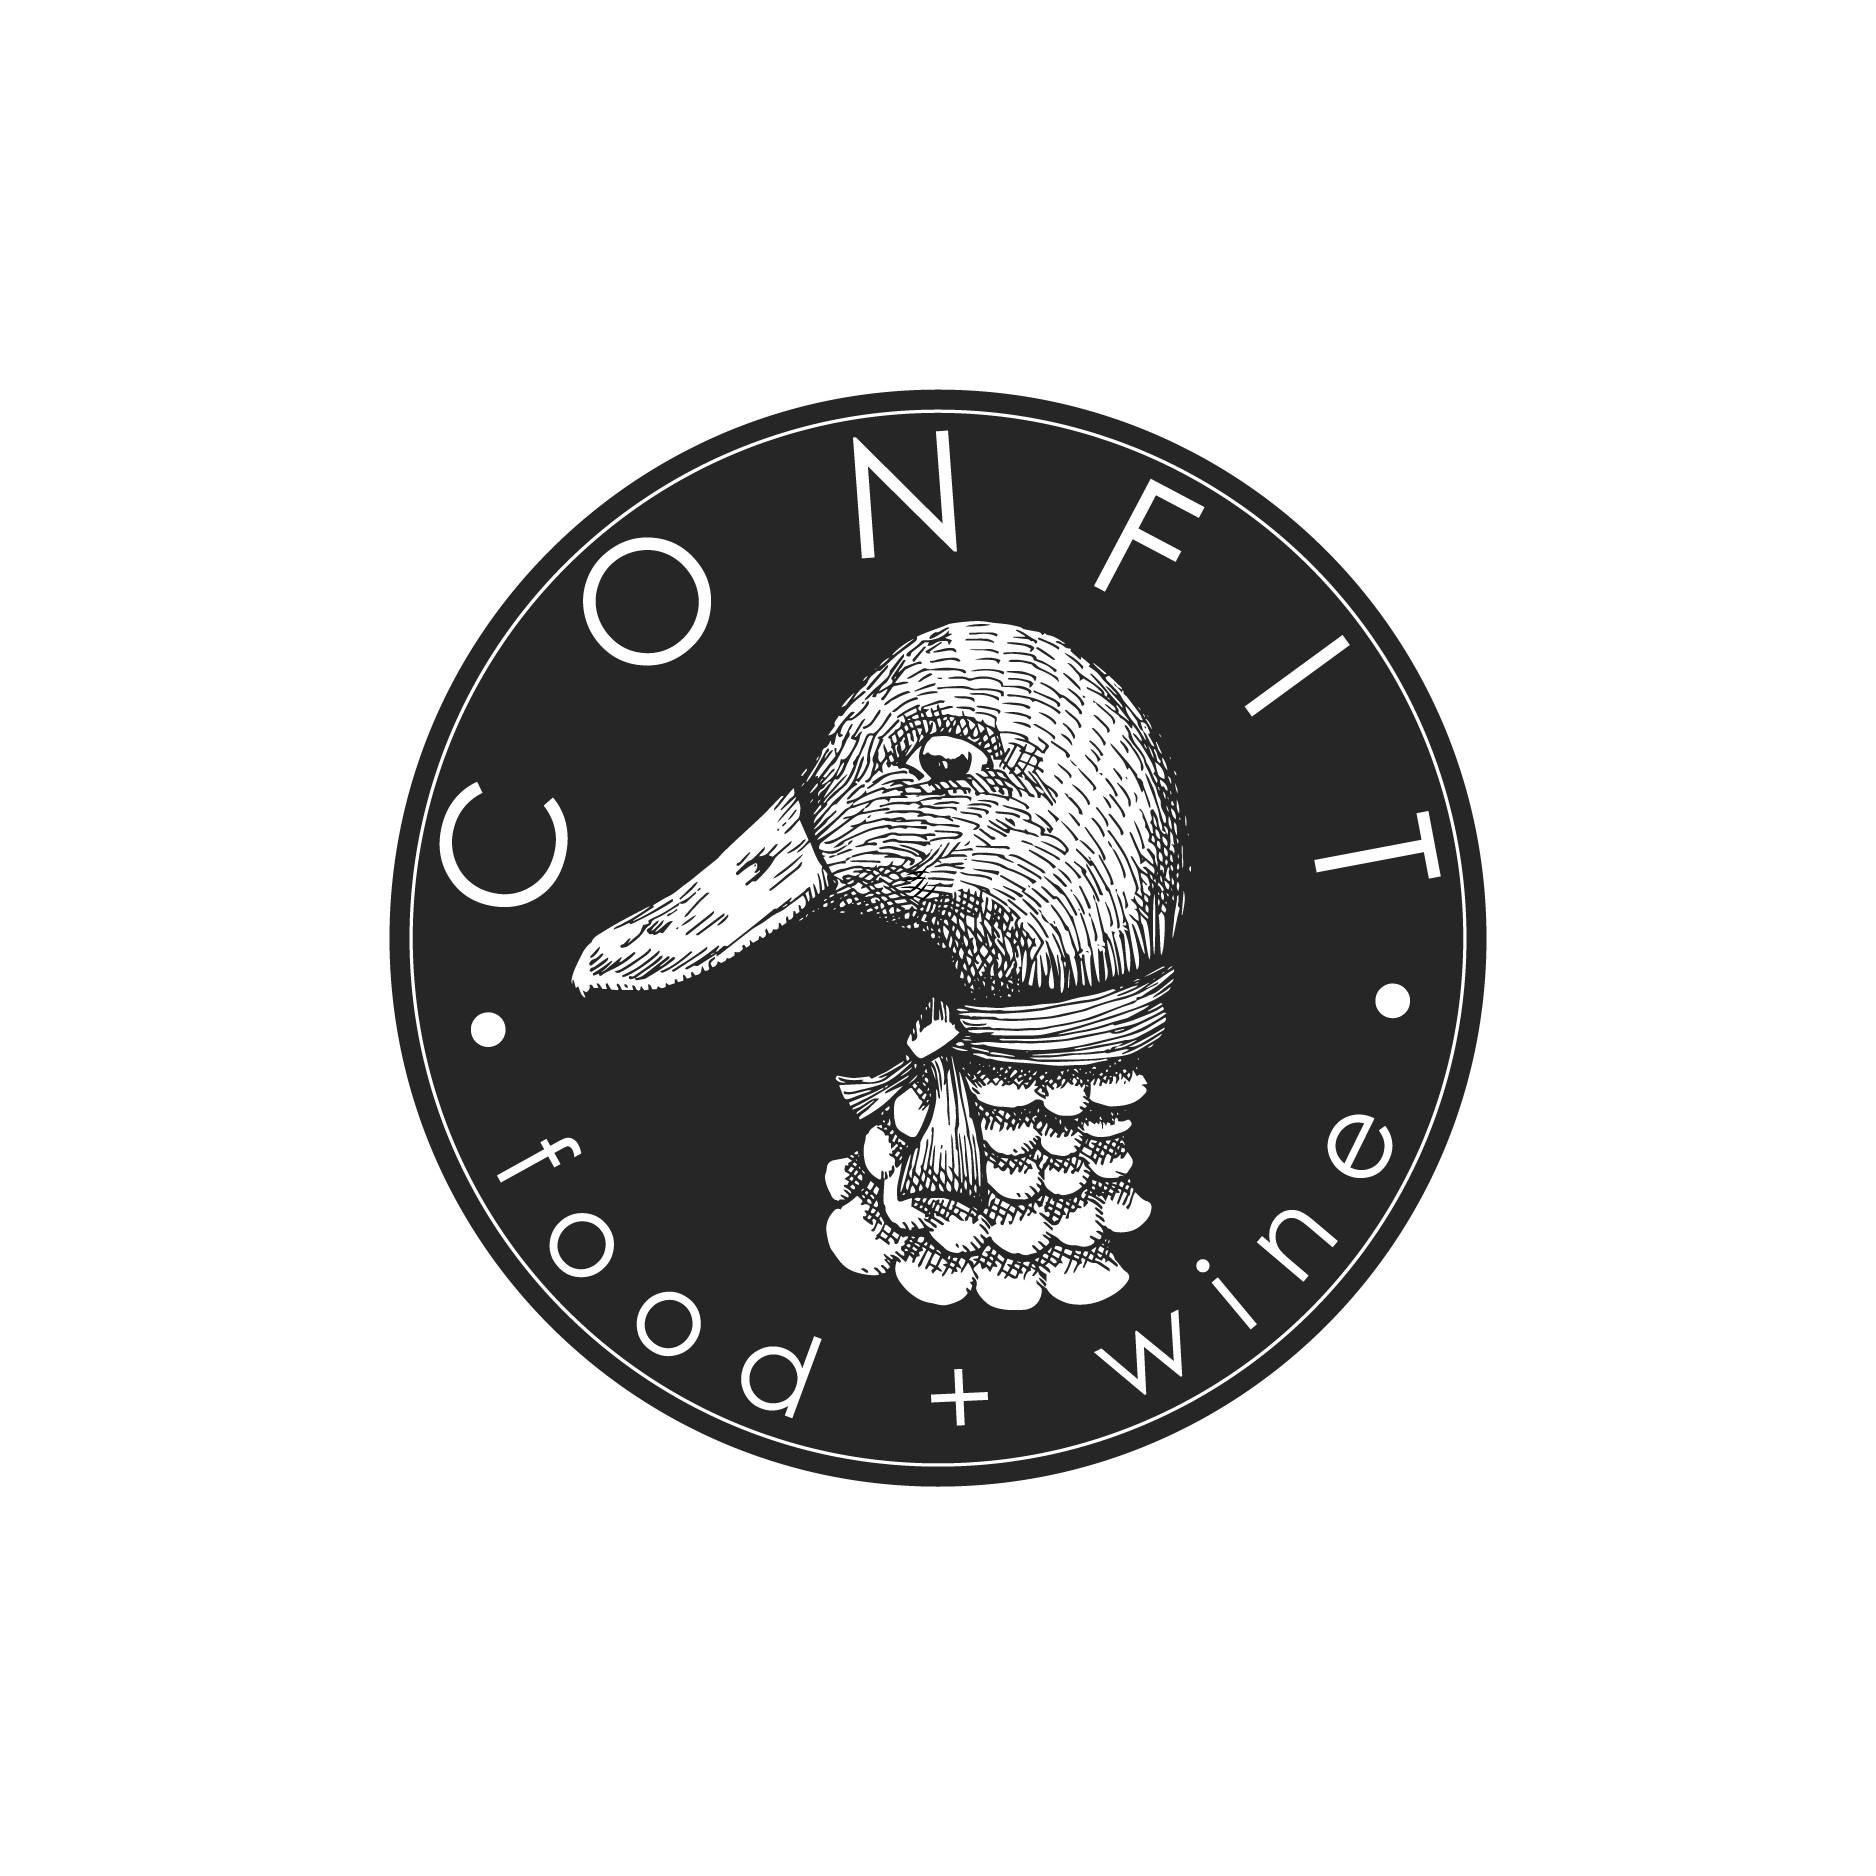 Confit Food + Wine logo design by logo designer Simeon Goa for your inspiration and for the worlds largest logo competition